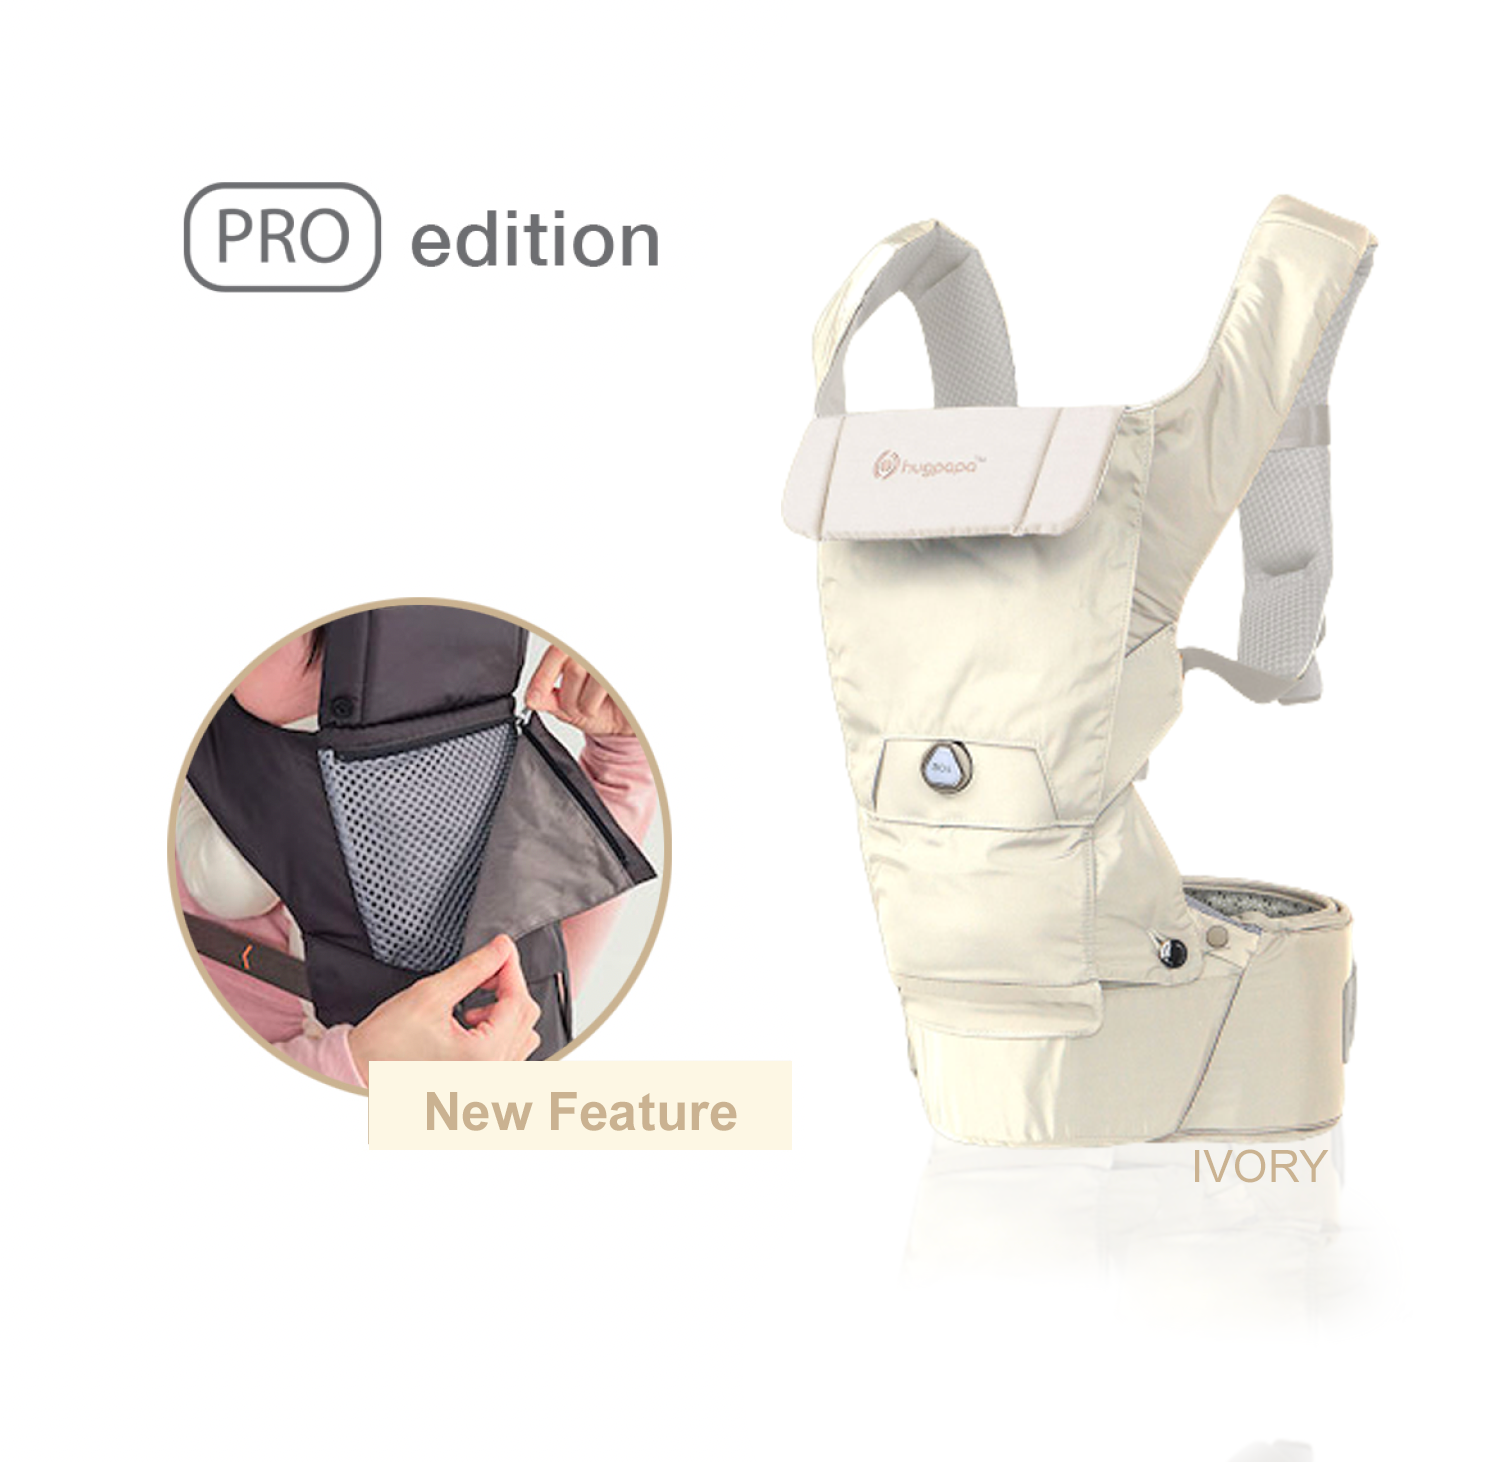 Hugpapa Dial-Fit Pro 3-in-1 Hip Seat Baby Carriers (with 7 enhanced features)